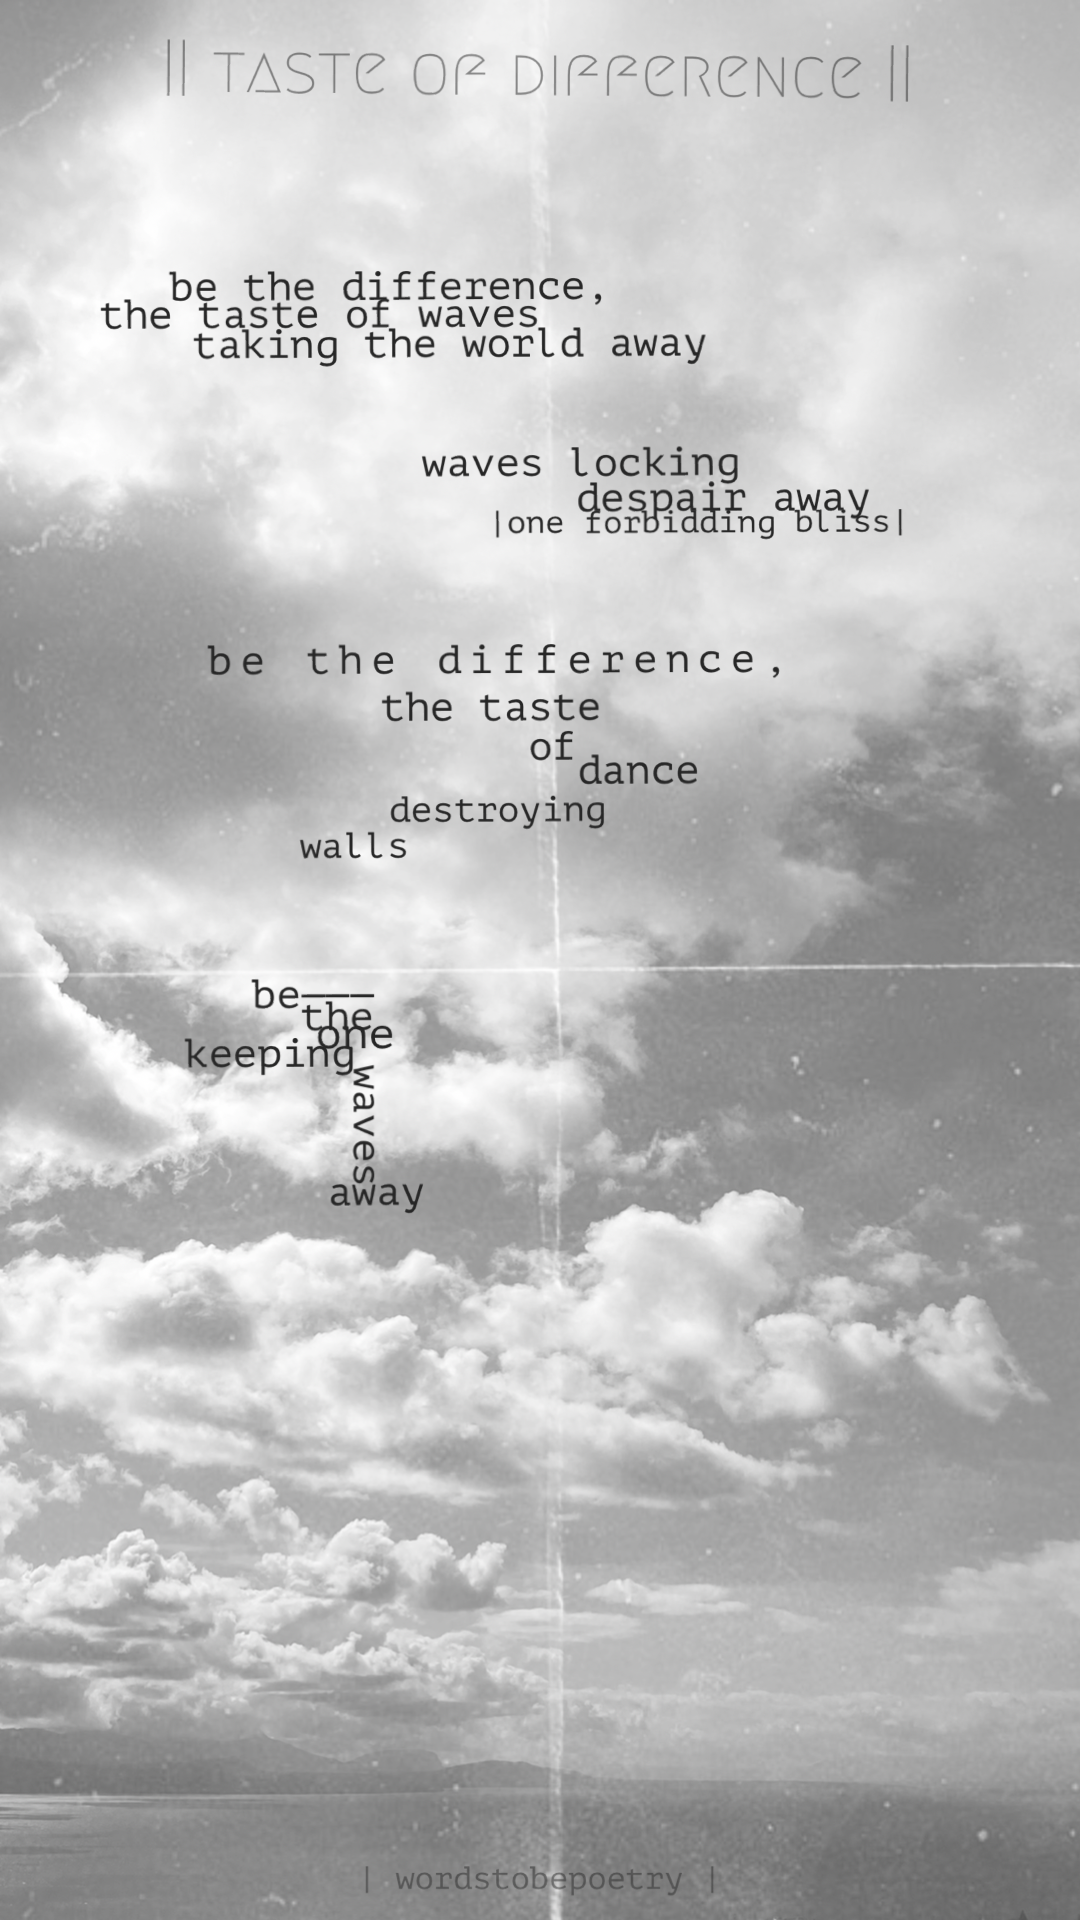 || taste of difference ||</p>
<p>Be the difference,<br />
the taste of waves<br />
taking the world away</p>
<p>Waves locking<br />
despair away<br />
| the one forbidding bliss |</p>
<p>Be the difference,<br />
the taste of dance<br />
destroying walls</p>
<p>Be—<br />
the one keeping<br />
waves away